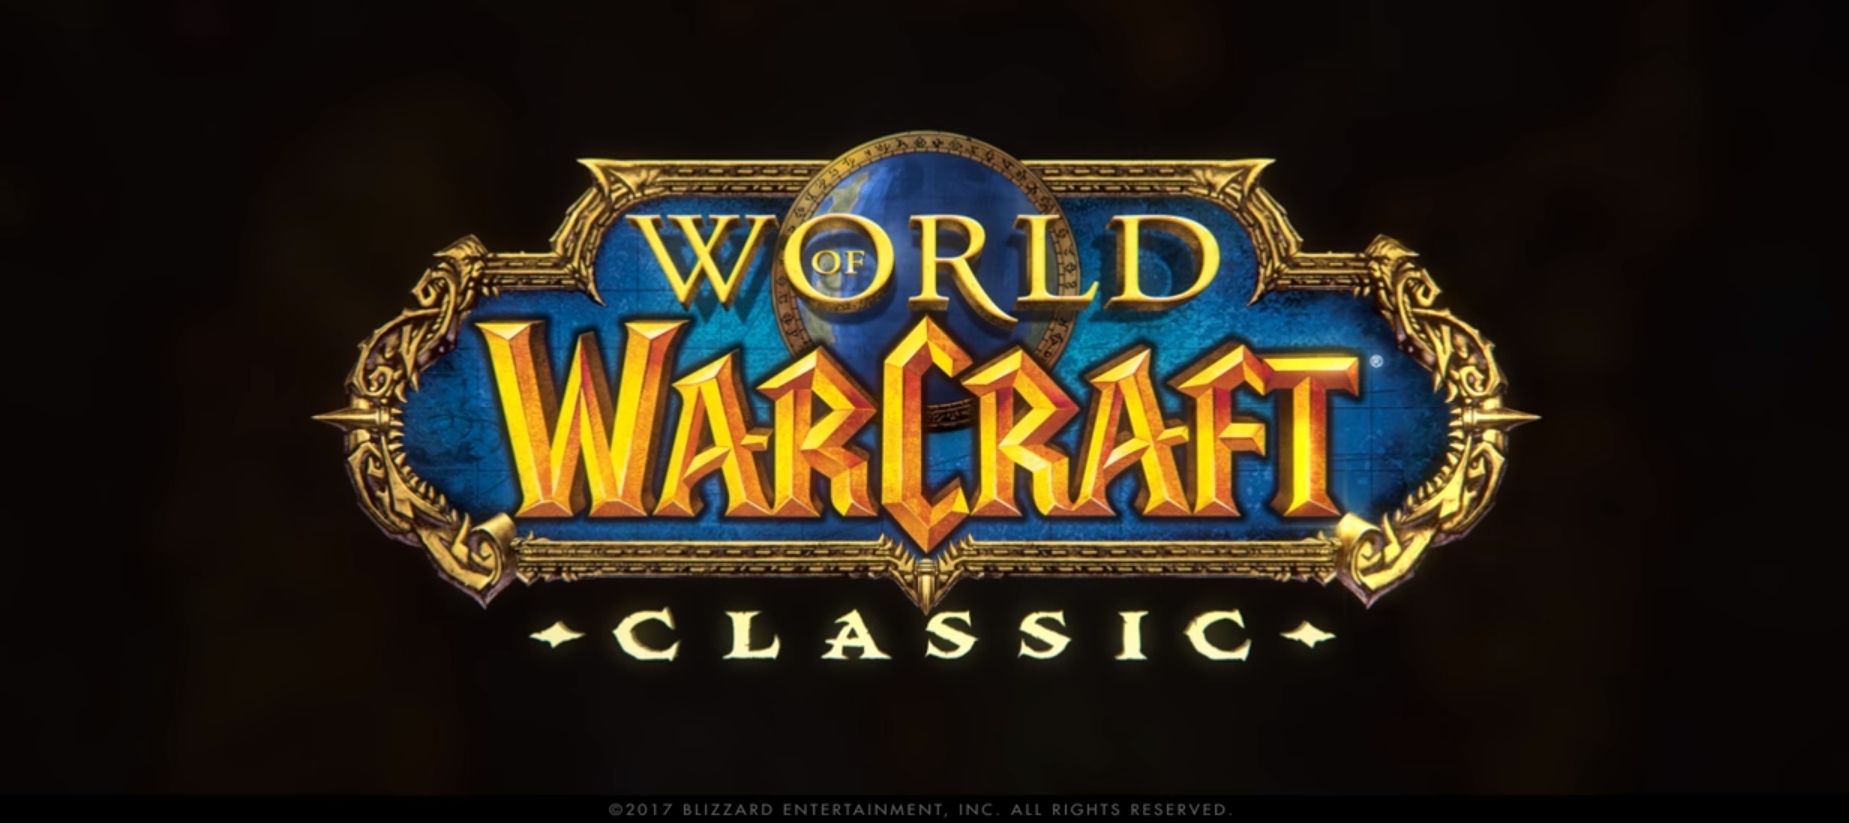 World Of Warcraft: Classic Has A High Volume Of Accounts Suspended As Blizzard Cracks Down On Cheating